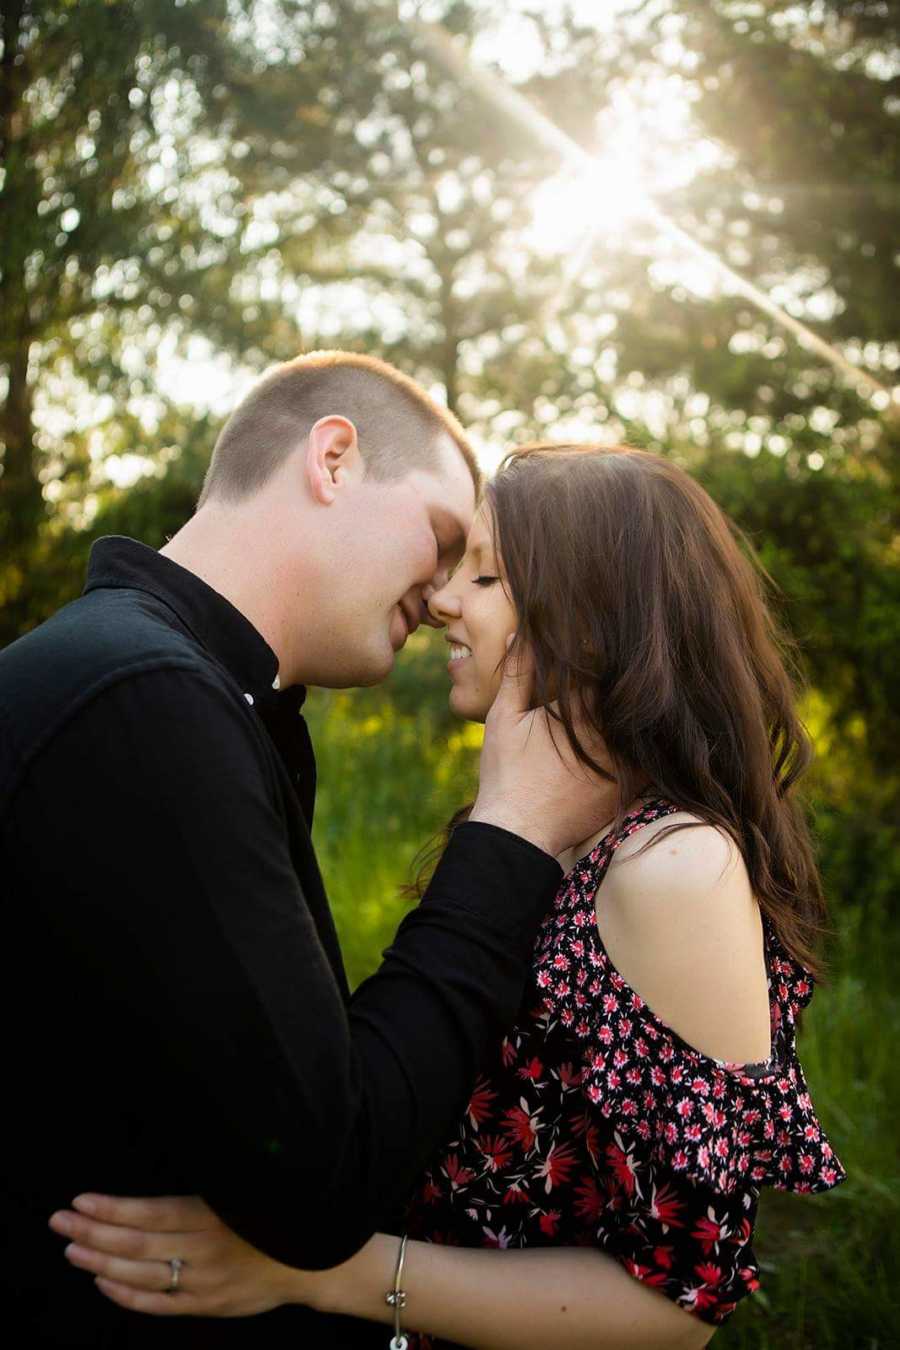 Son of woman with breast cancer leans in to kiss fiancee